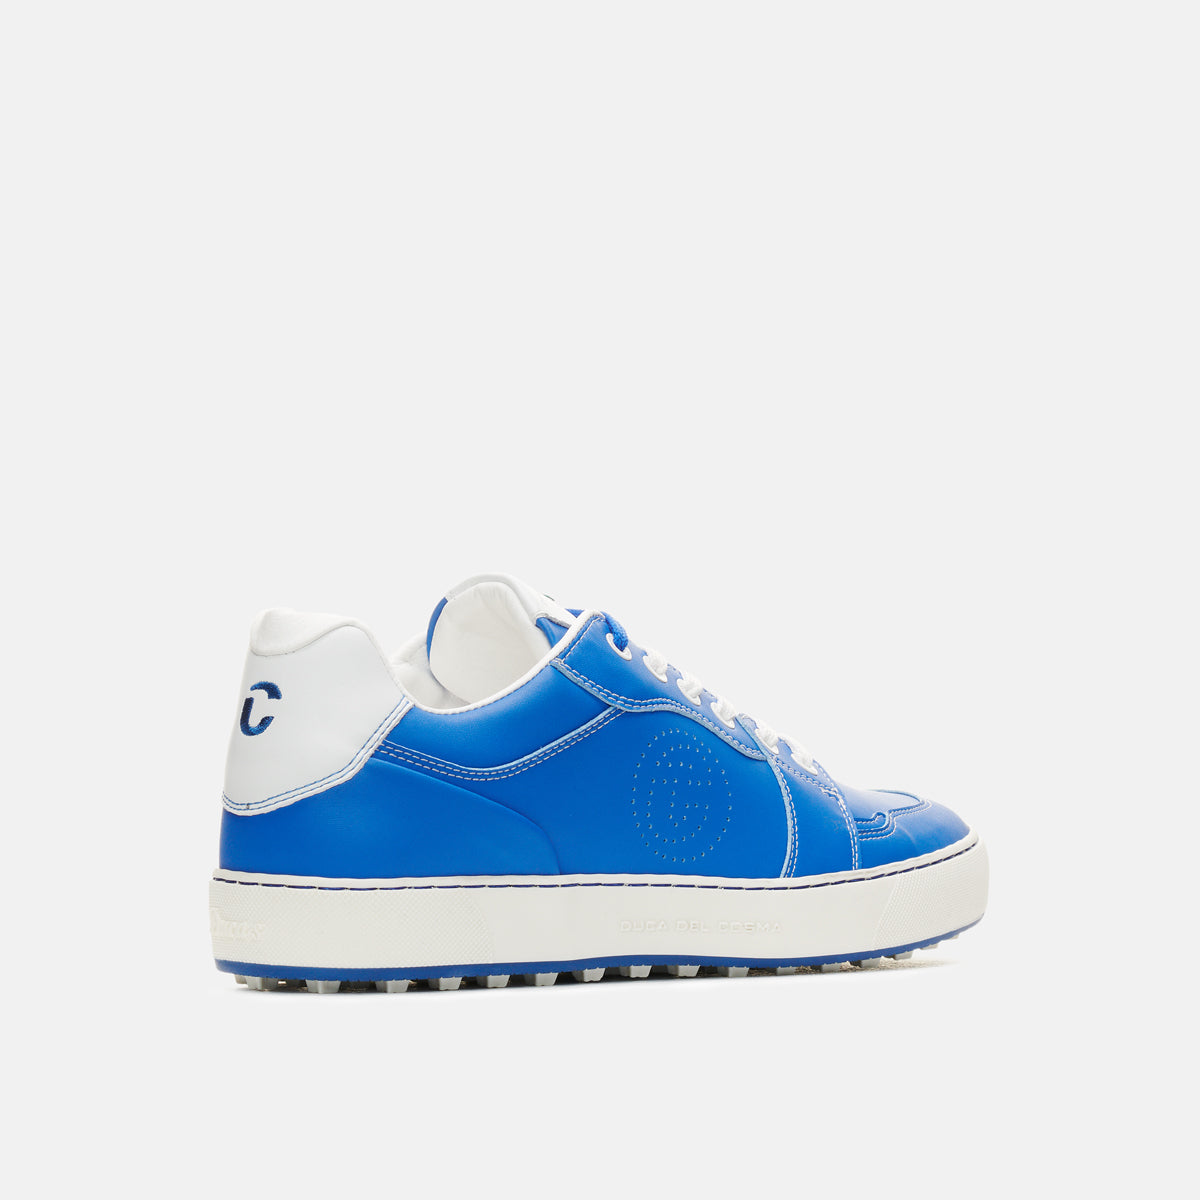 Duca del Cosma Giordana Blue Men's golf shoe is the best sportive and stylish golf shoe for on and off course 